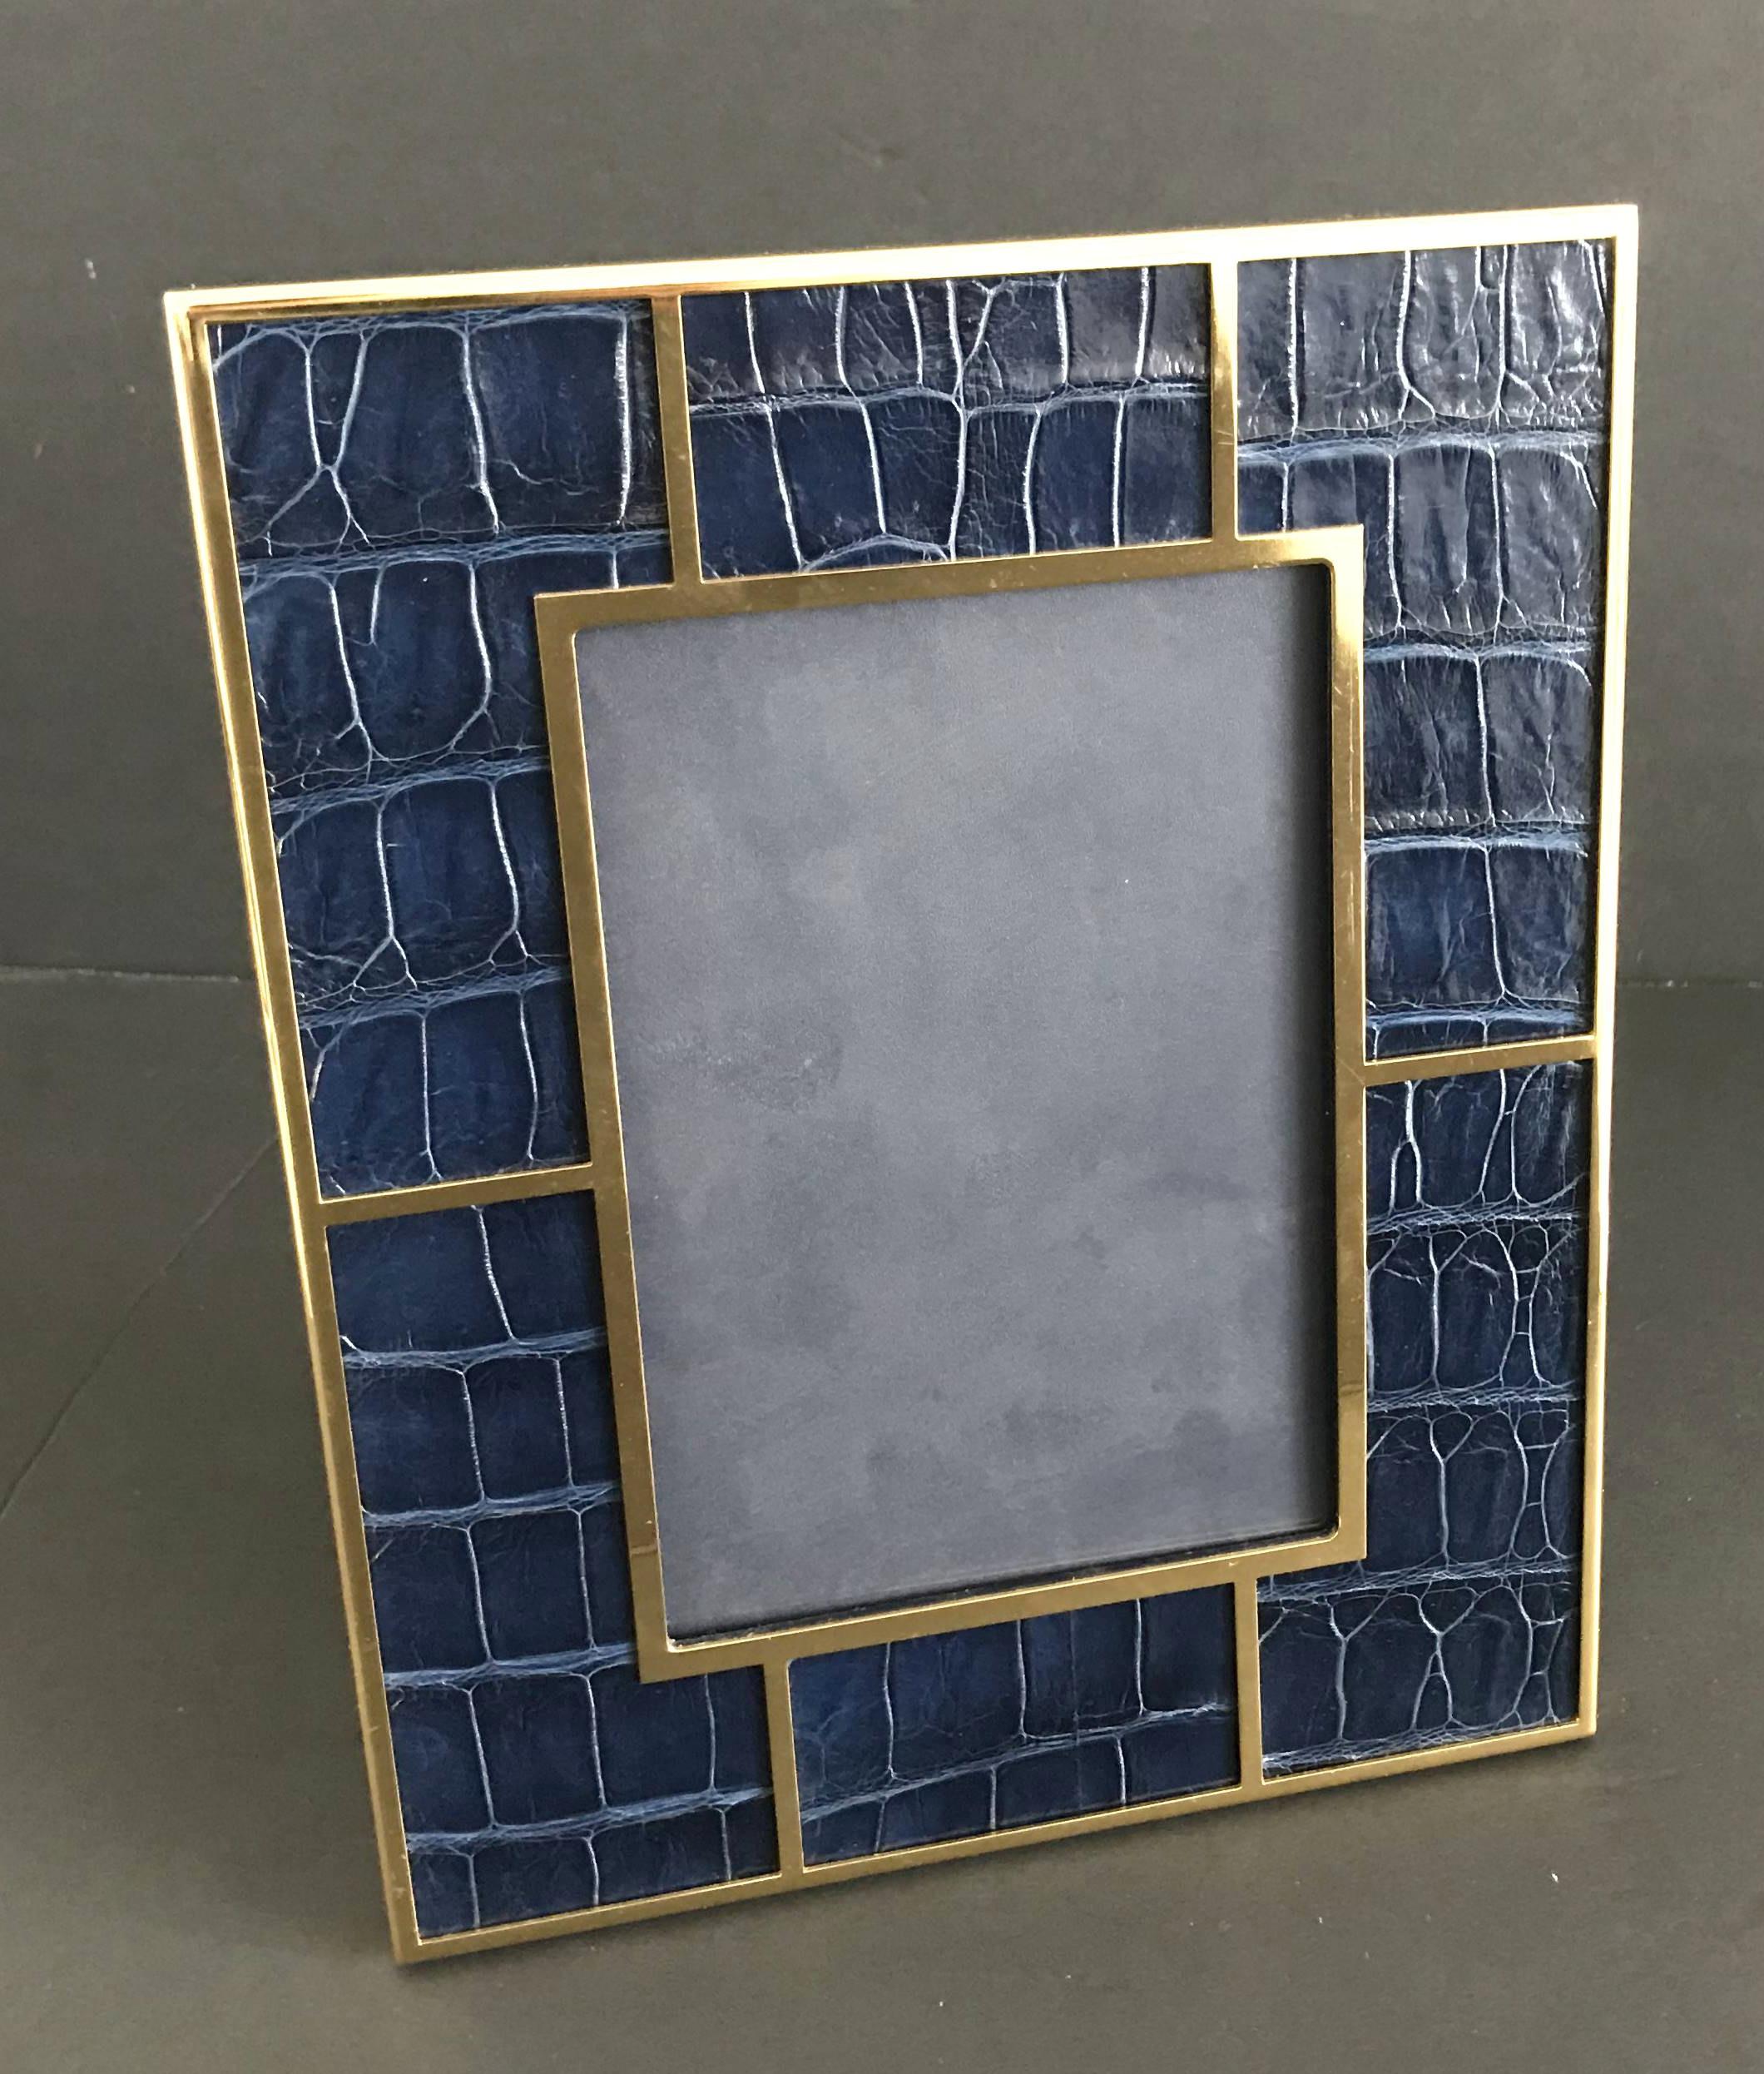 Navy blue crocodile skin and gold-plated picture frame by Fabio Ltd
Height: 10.5 inches / Width: 8.5 inches / Depth: 1 inch
Photo size: 5 inches by 7 inches
1 in stock in Palm Springs
Order Reference #: FABIOLTD PF32
This piece makes for great and